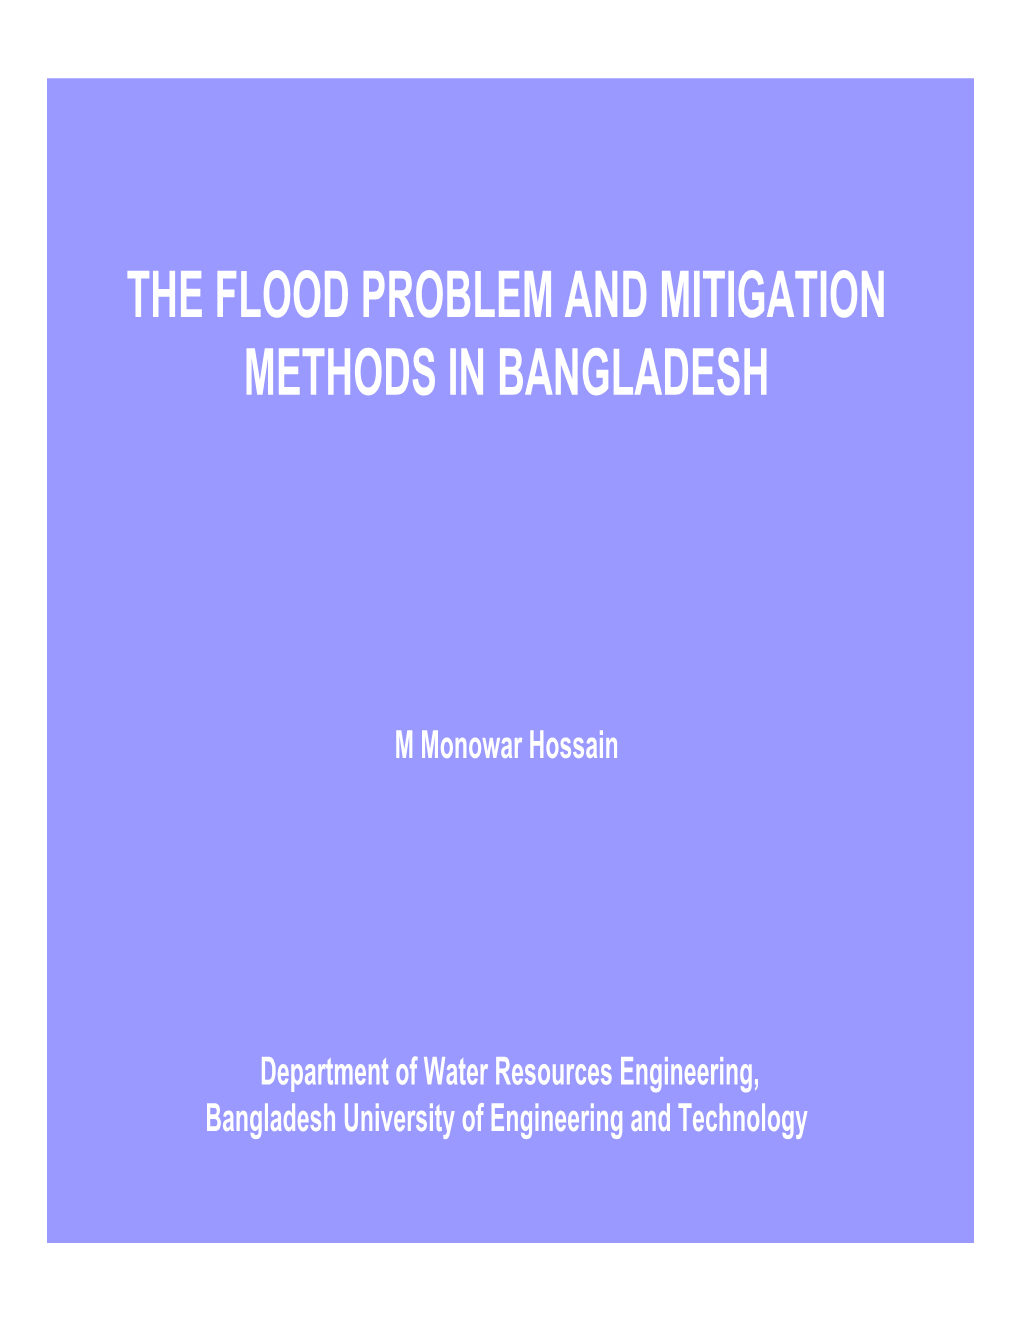 The Flood Problem and Mitigation Methods in Bangladesh